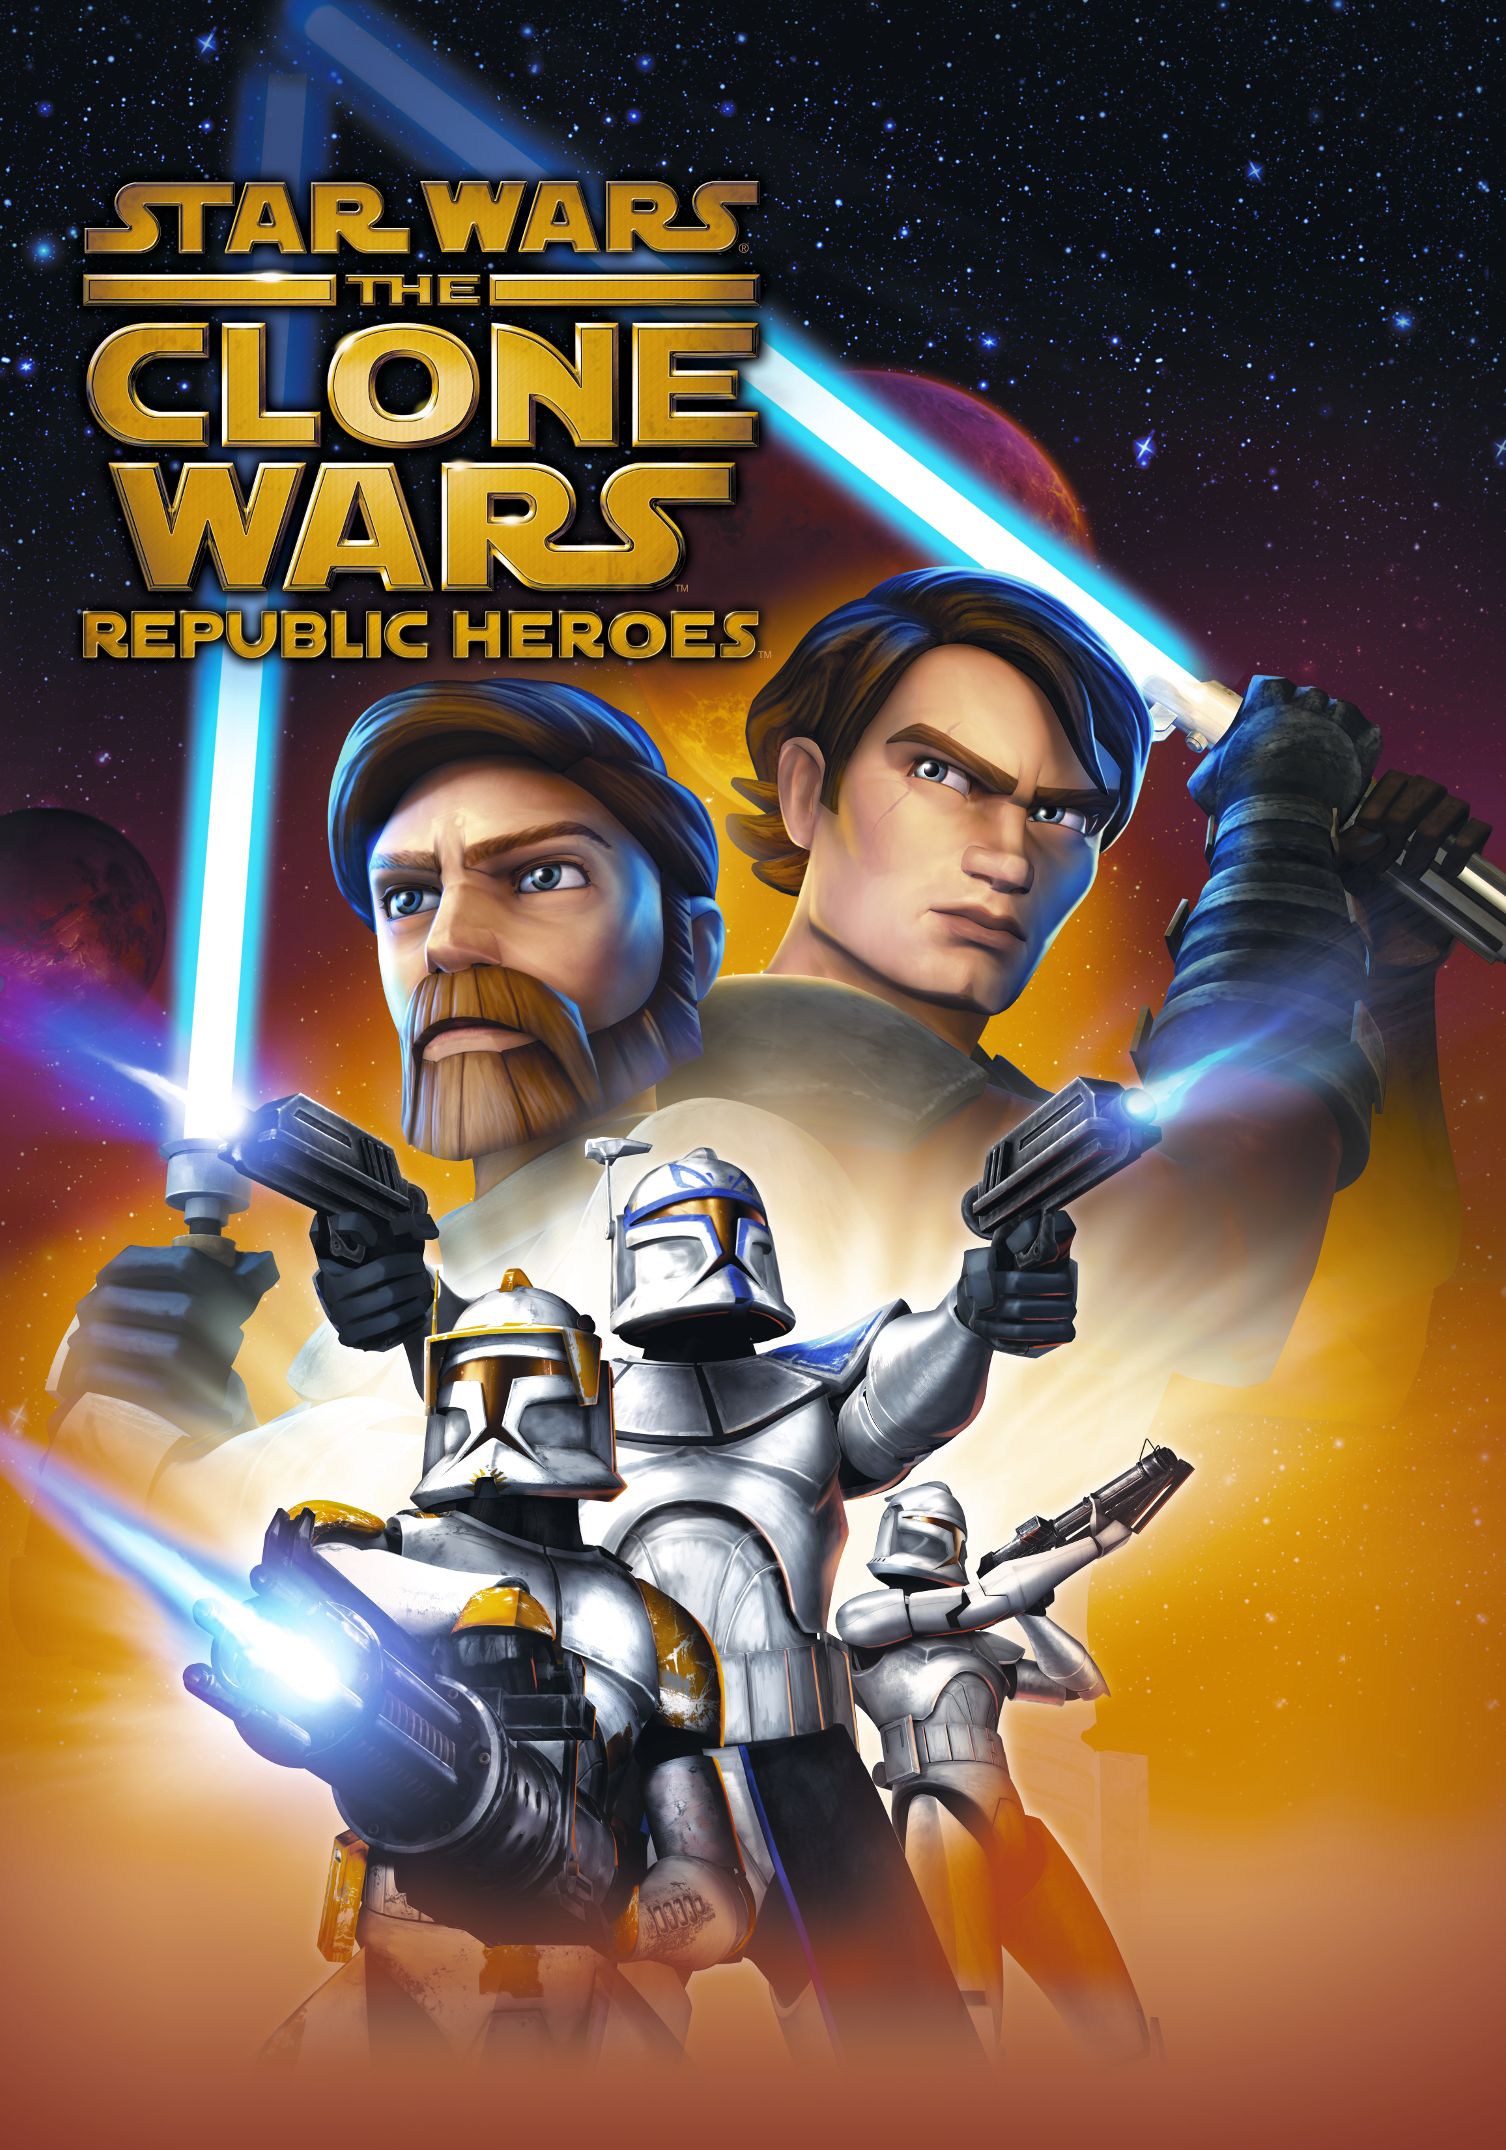 Image of Star Wars: The Clone Wars – Republic Heroes